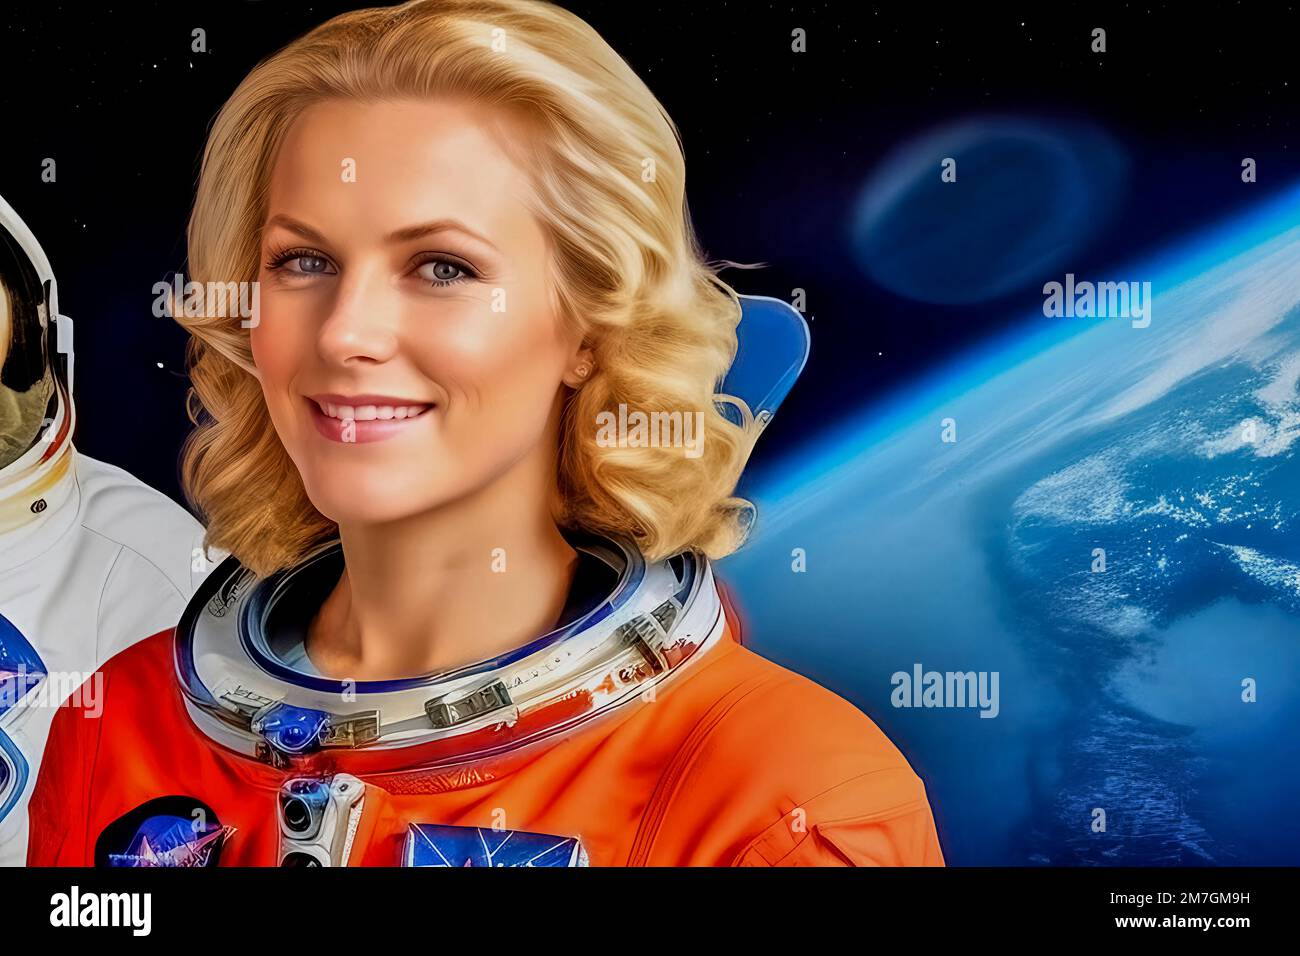 Blonde female space traveler wearing a space suit with no helmet smiling against a blurred background with an image of the blue earth, fictional perso Stock Photo